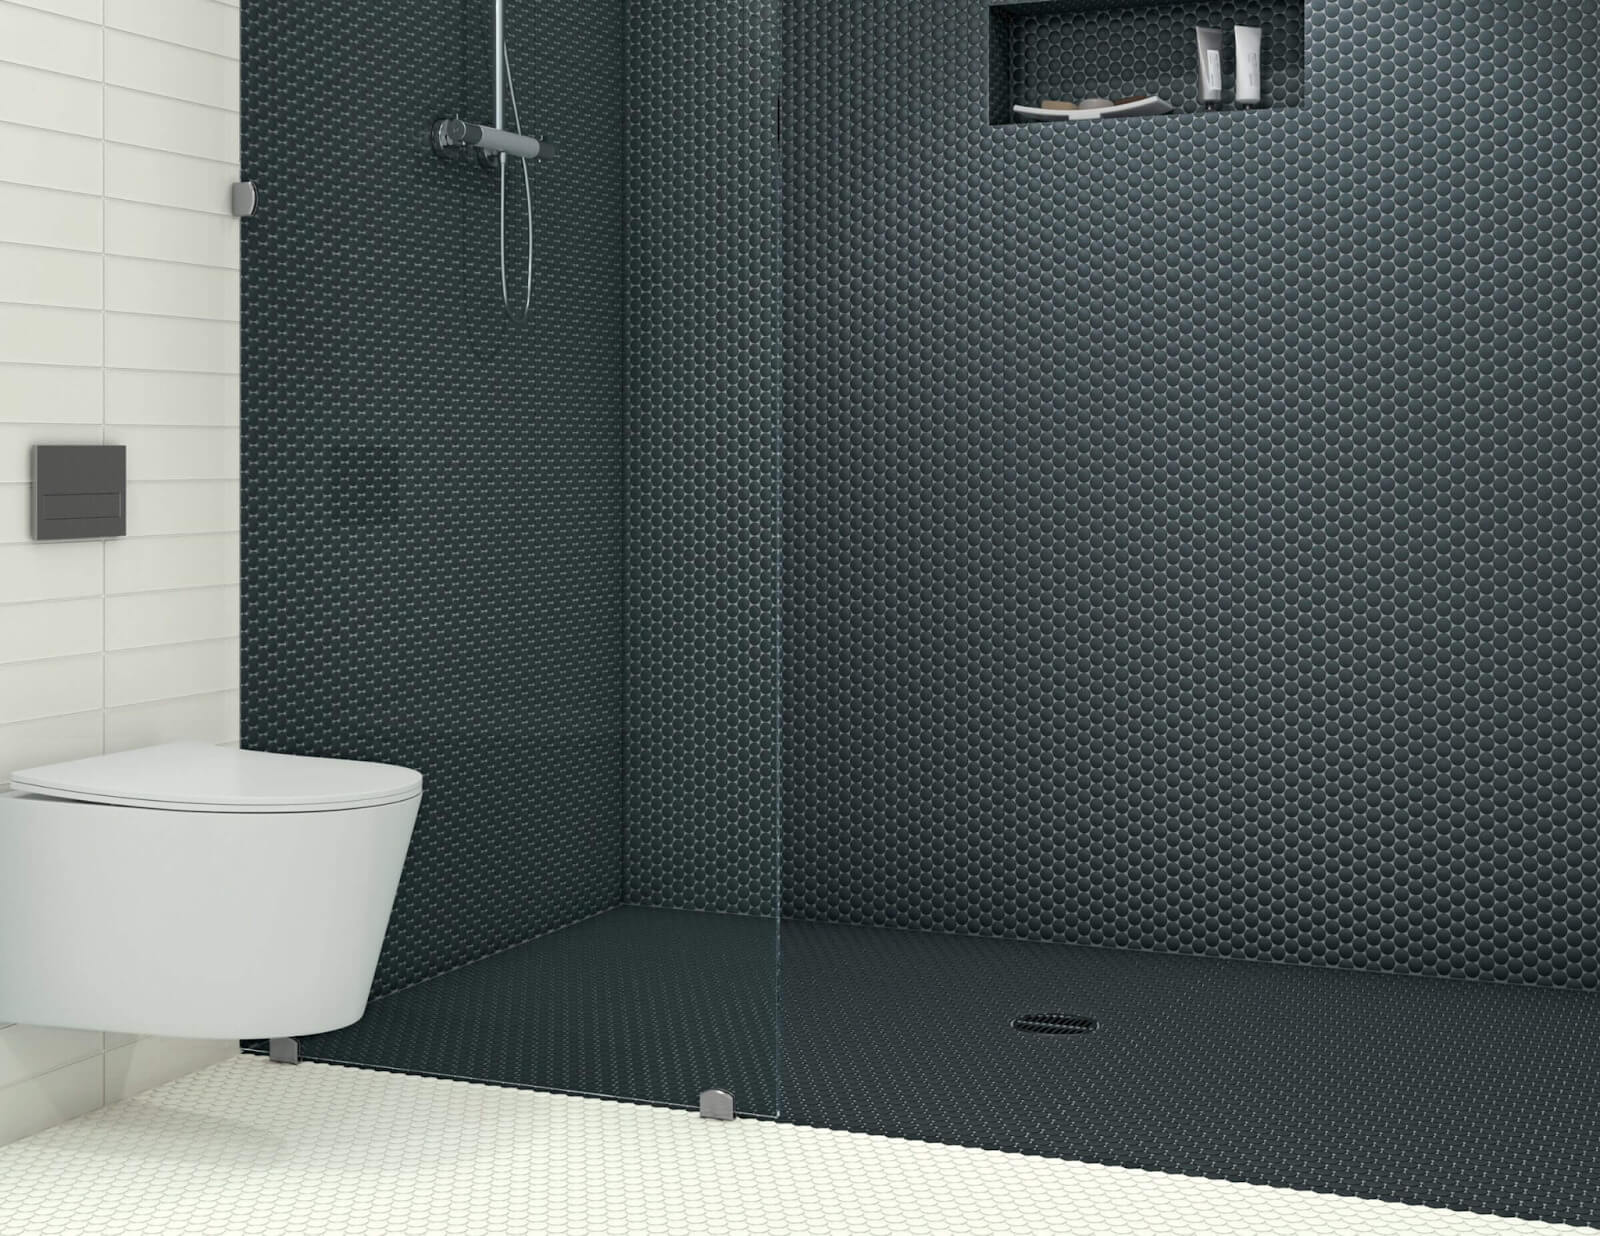 Shower with black penny round mosaic tile